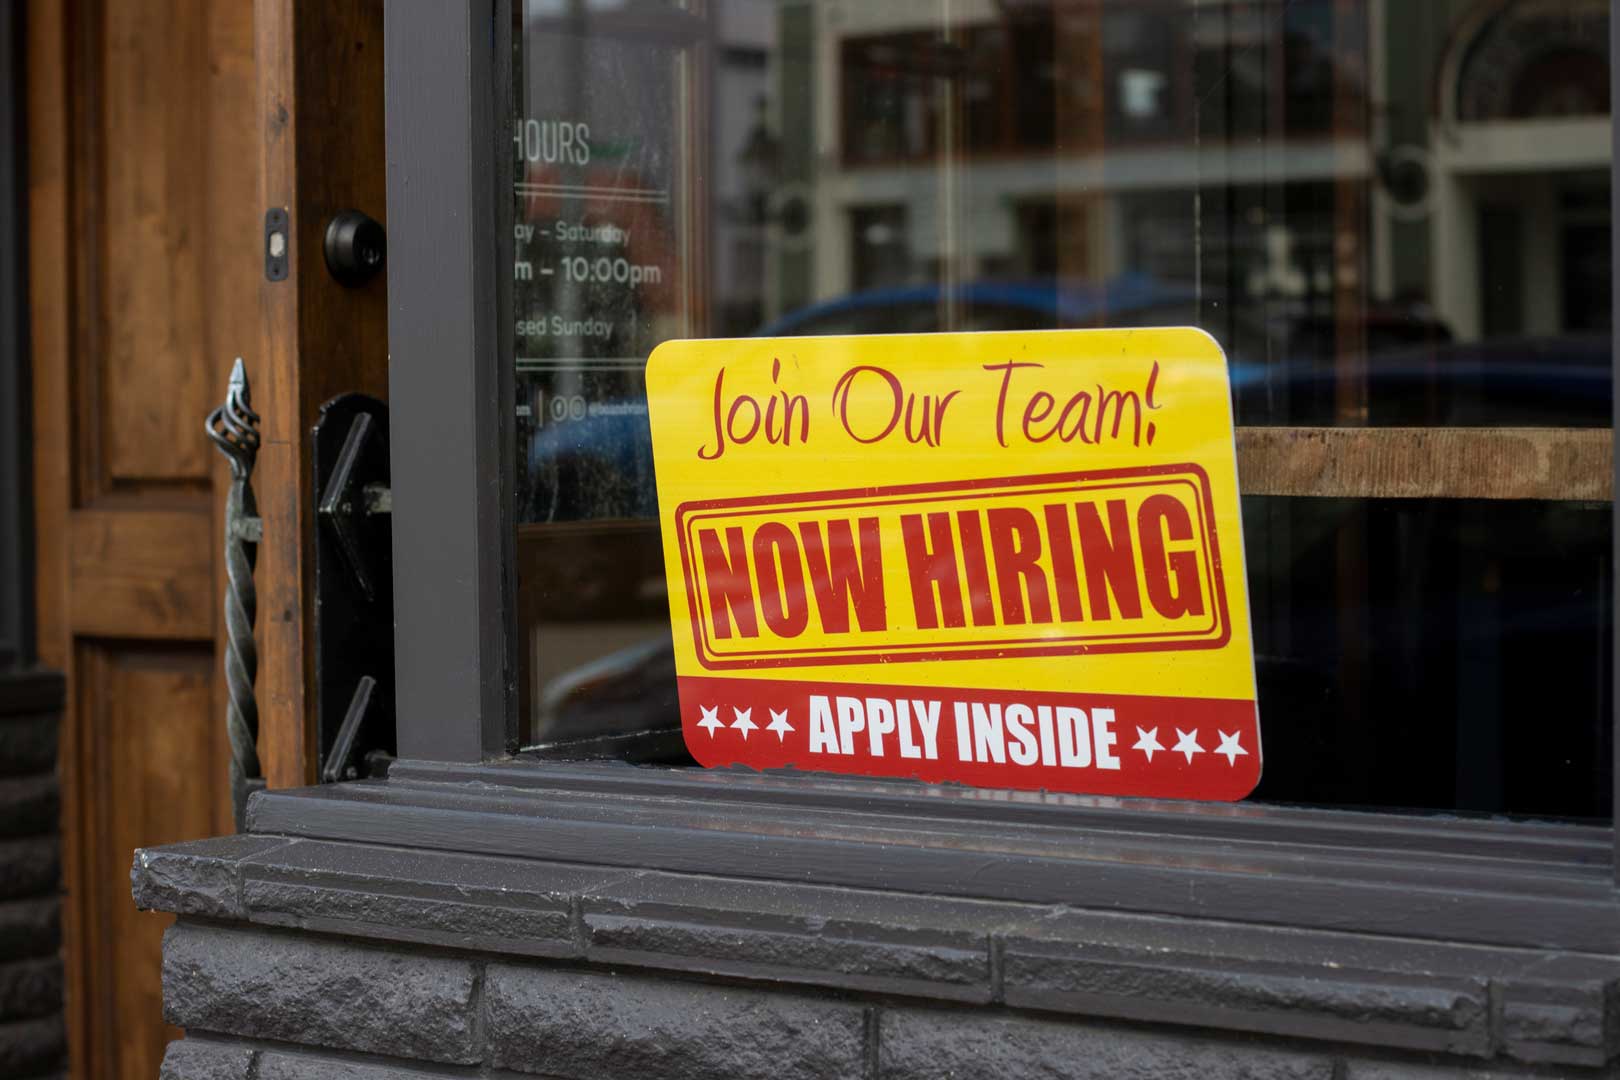 Now Hiring sign is seen at the storefront